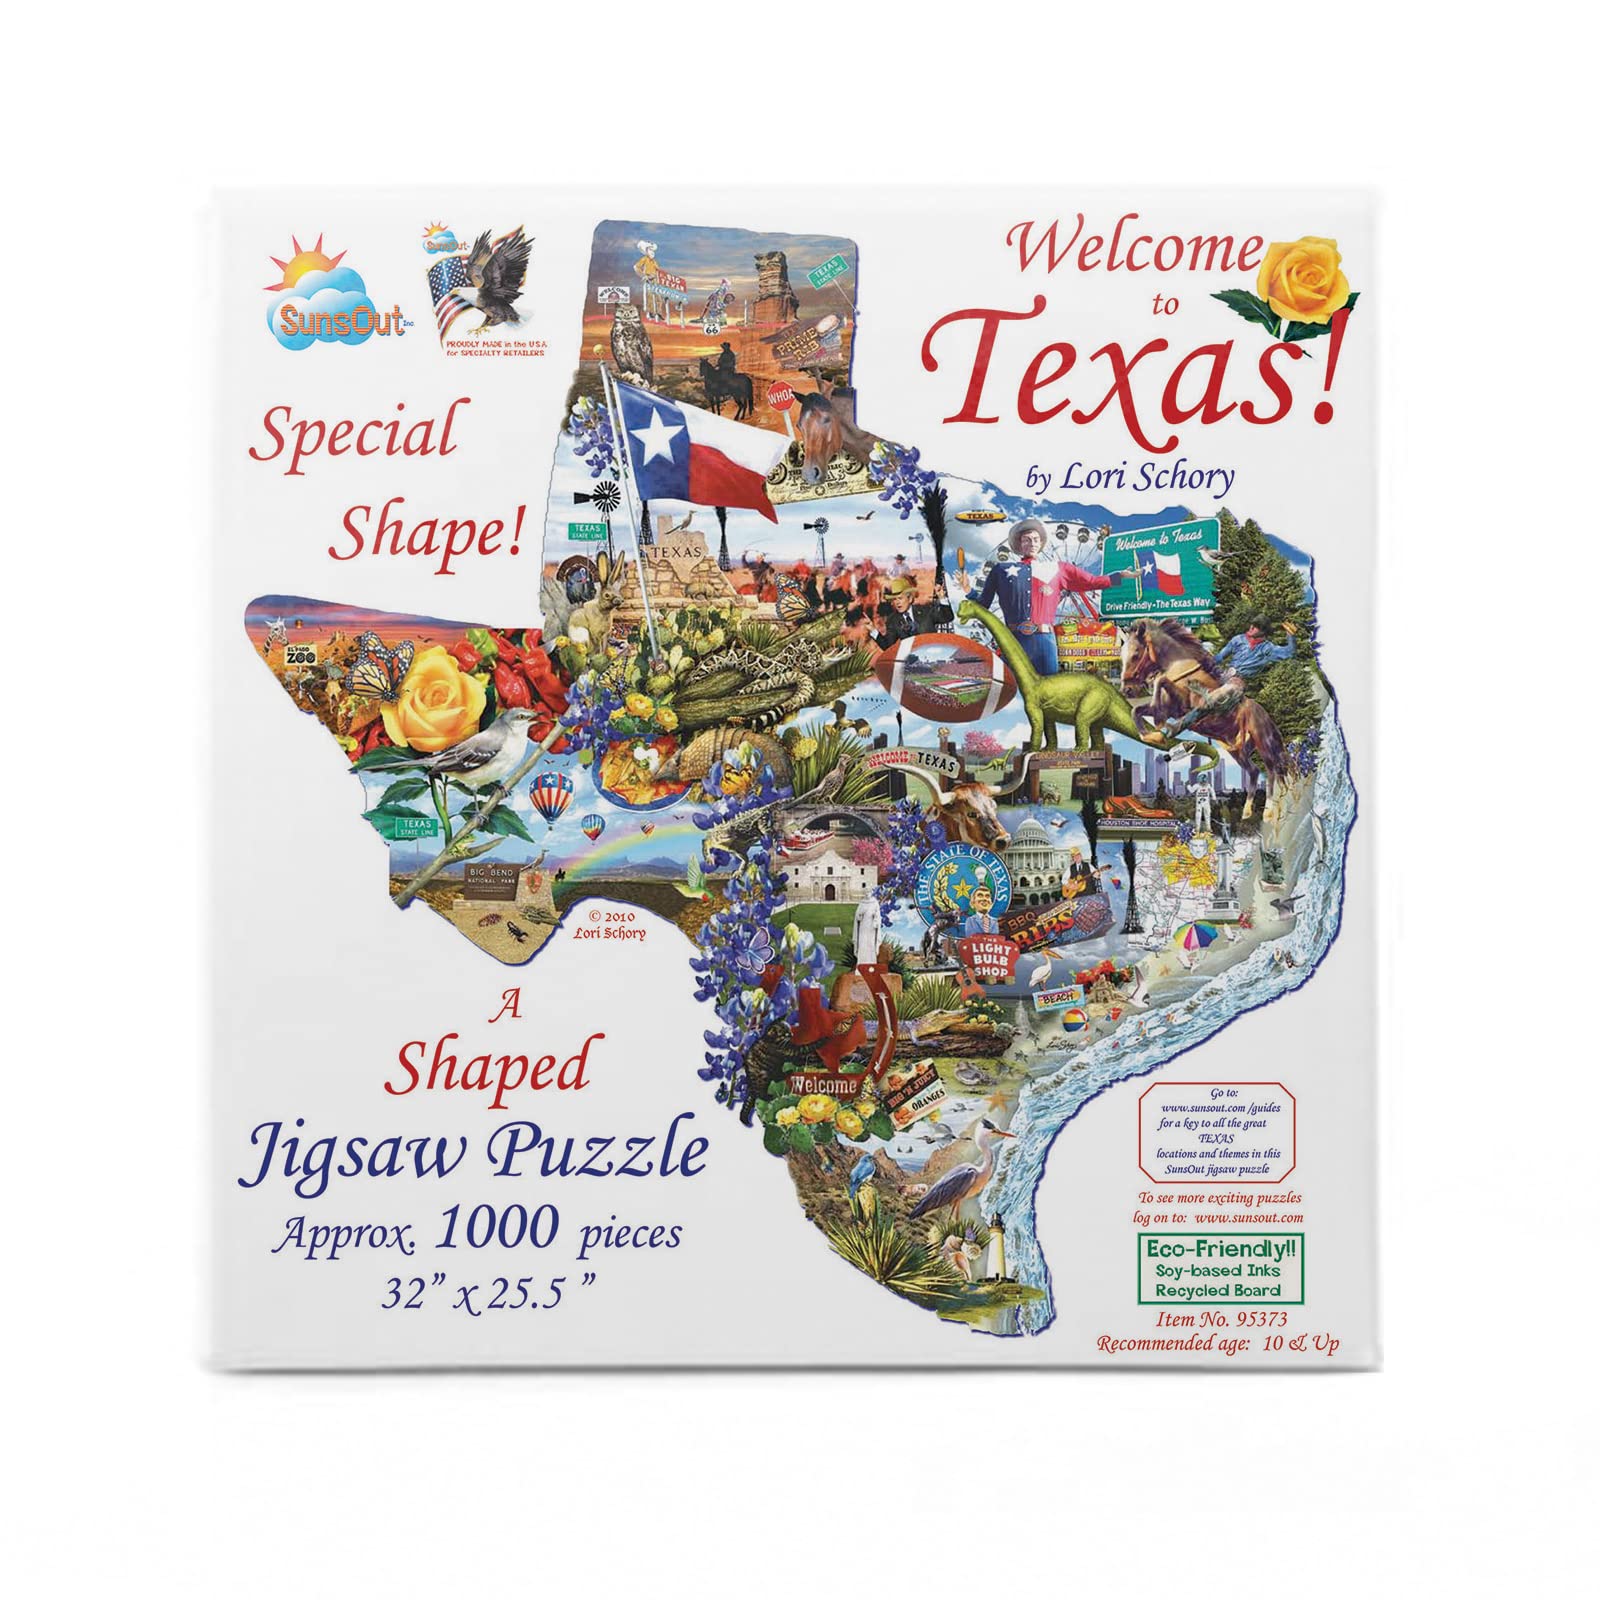 Book Cover SUNSOUT INC - Welcome to Texas - 1000 pc Special Shape Jigsaw Puzzle by Artist: Lori Schory - Finished Size 32